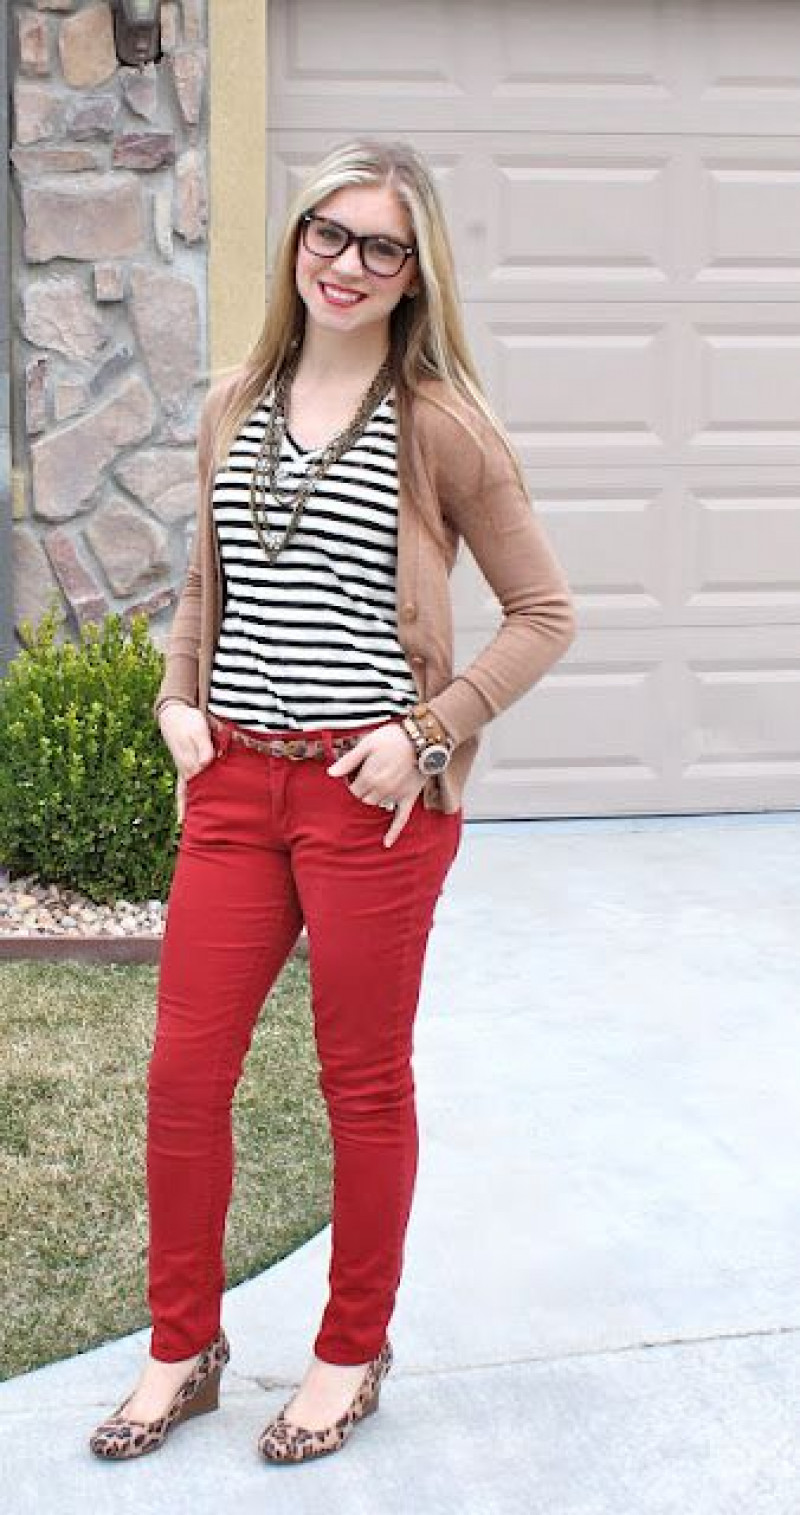 Beige Long Sleeves T-Shirt, Red Casual Trouser, Outfits With Red Pants / Jeans